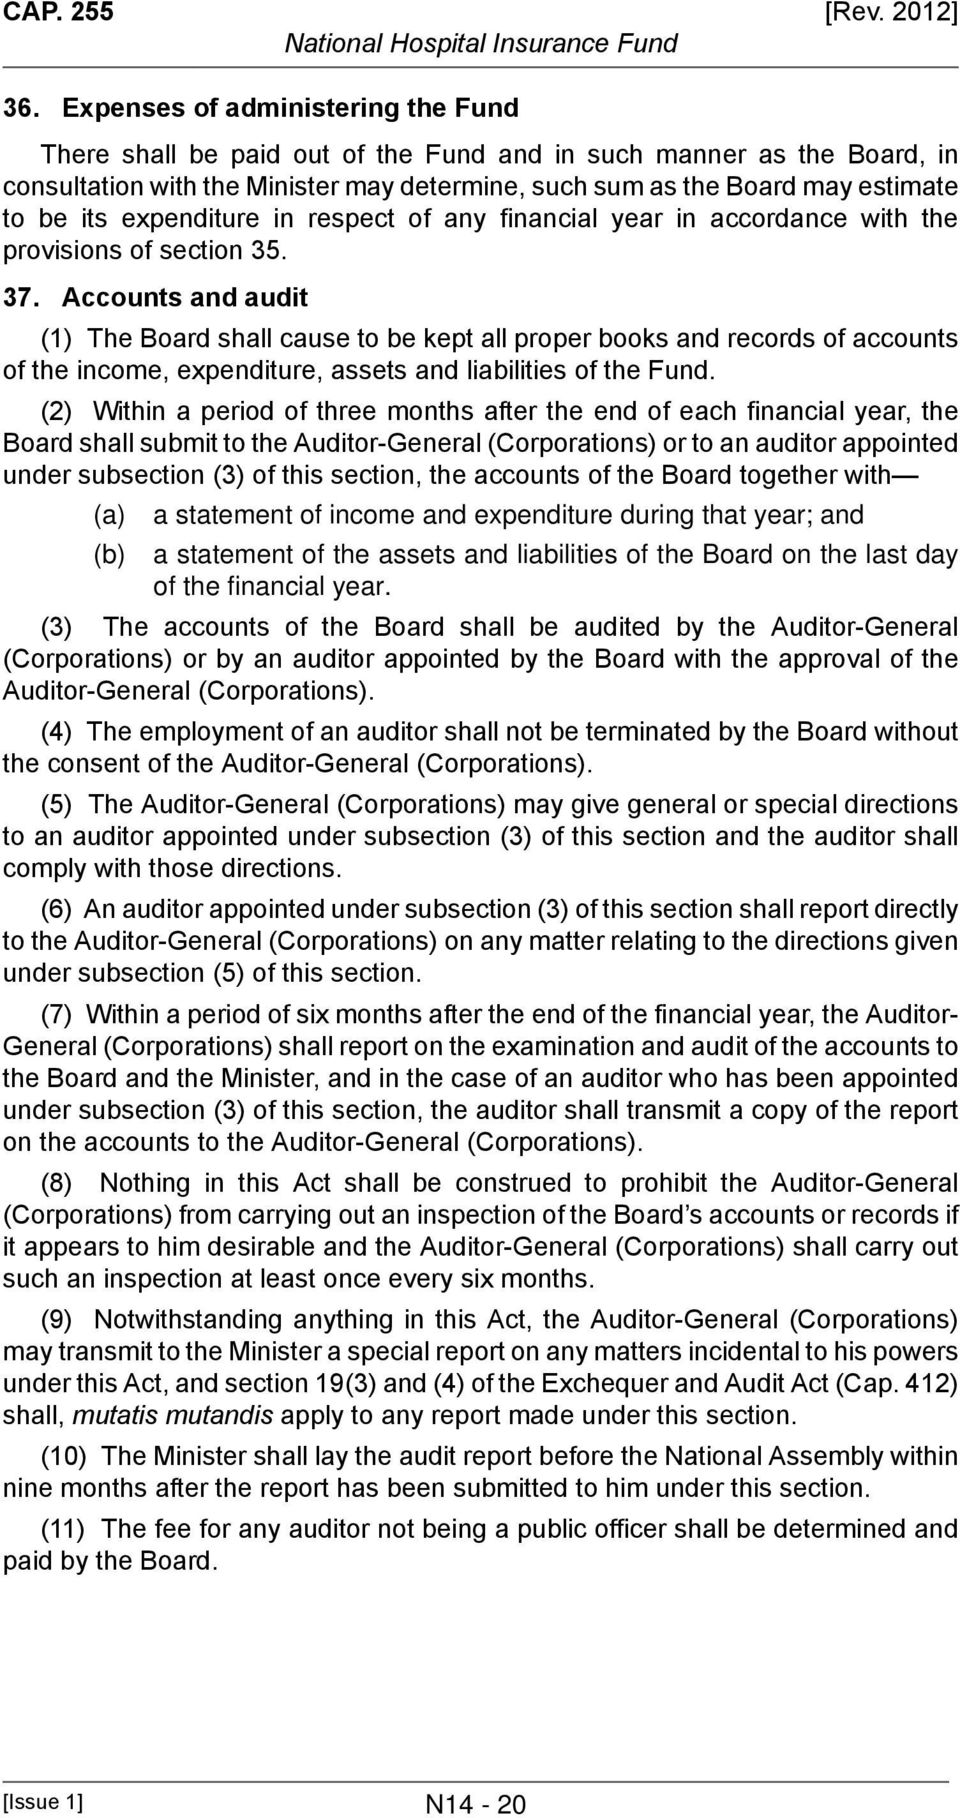 expenditure in respect of any financial year in accordance with the provisions of section 35. 37.